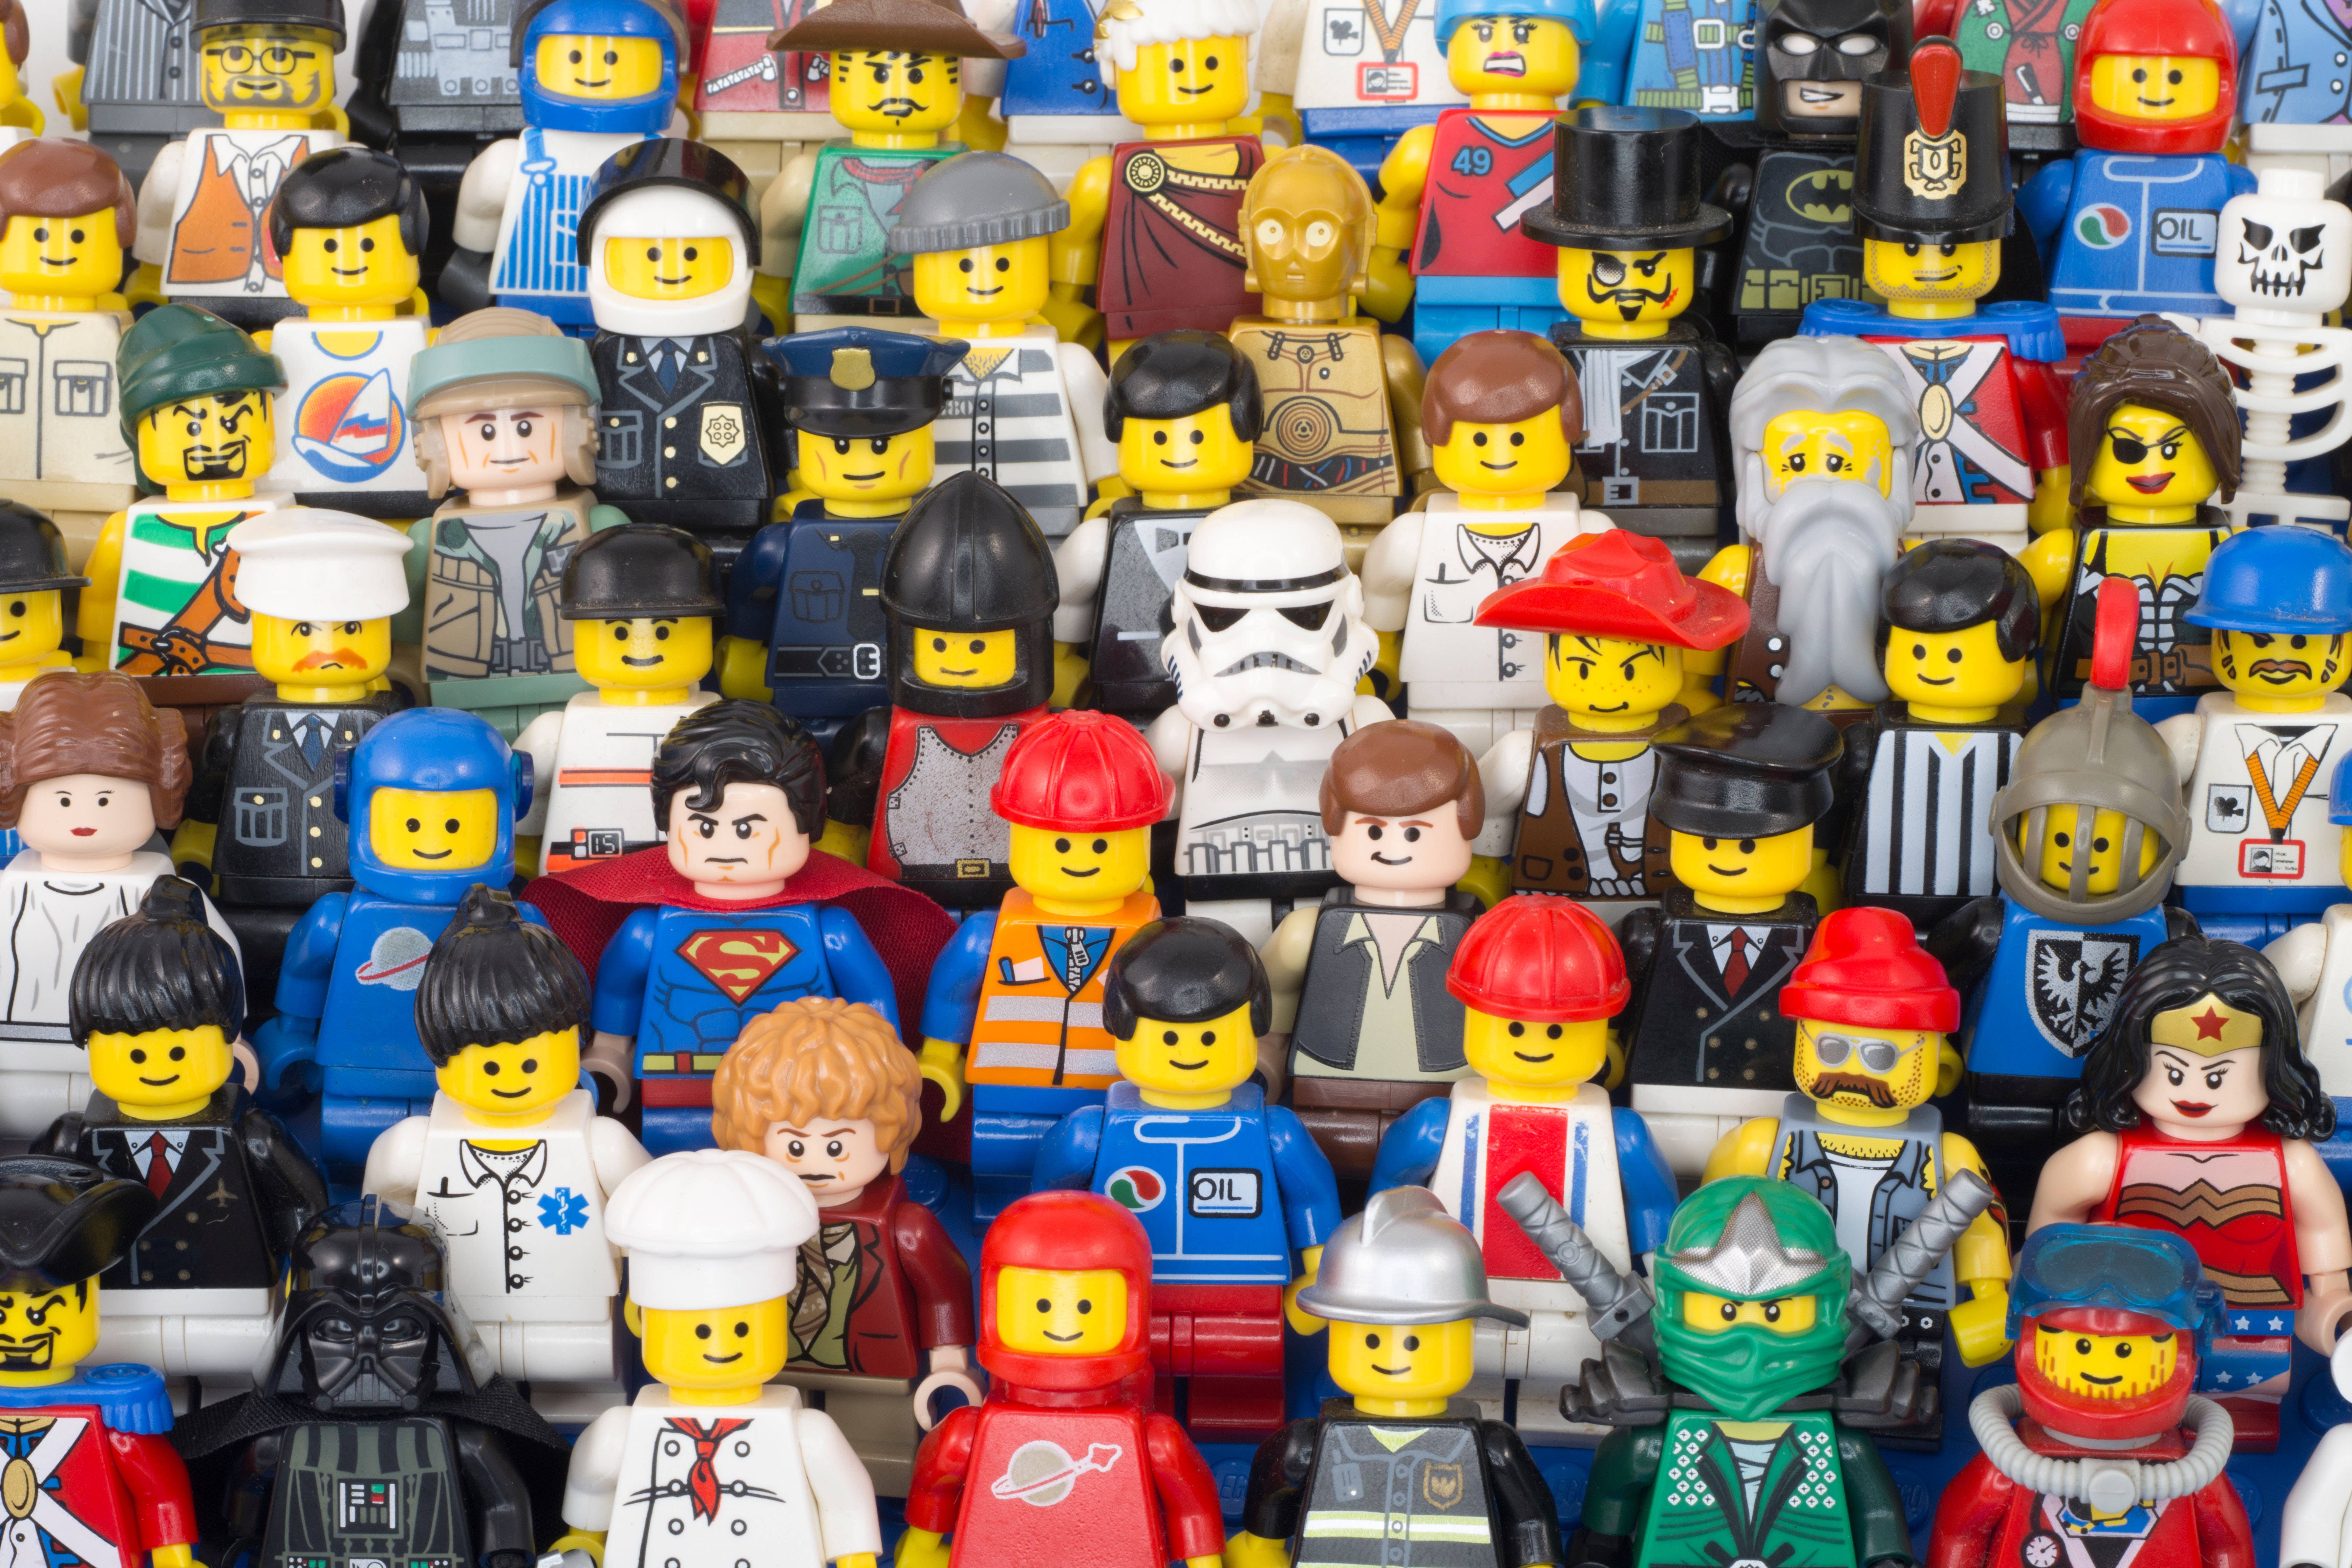 Lego minifigures both classic and modern versions from early 80’s spaceman to Stormtroopers and a Hobbit (Chris Willson/Alamy/PA)